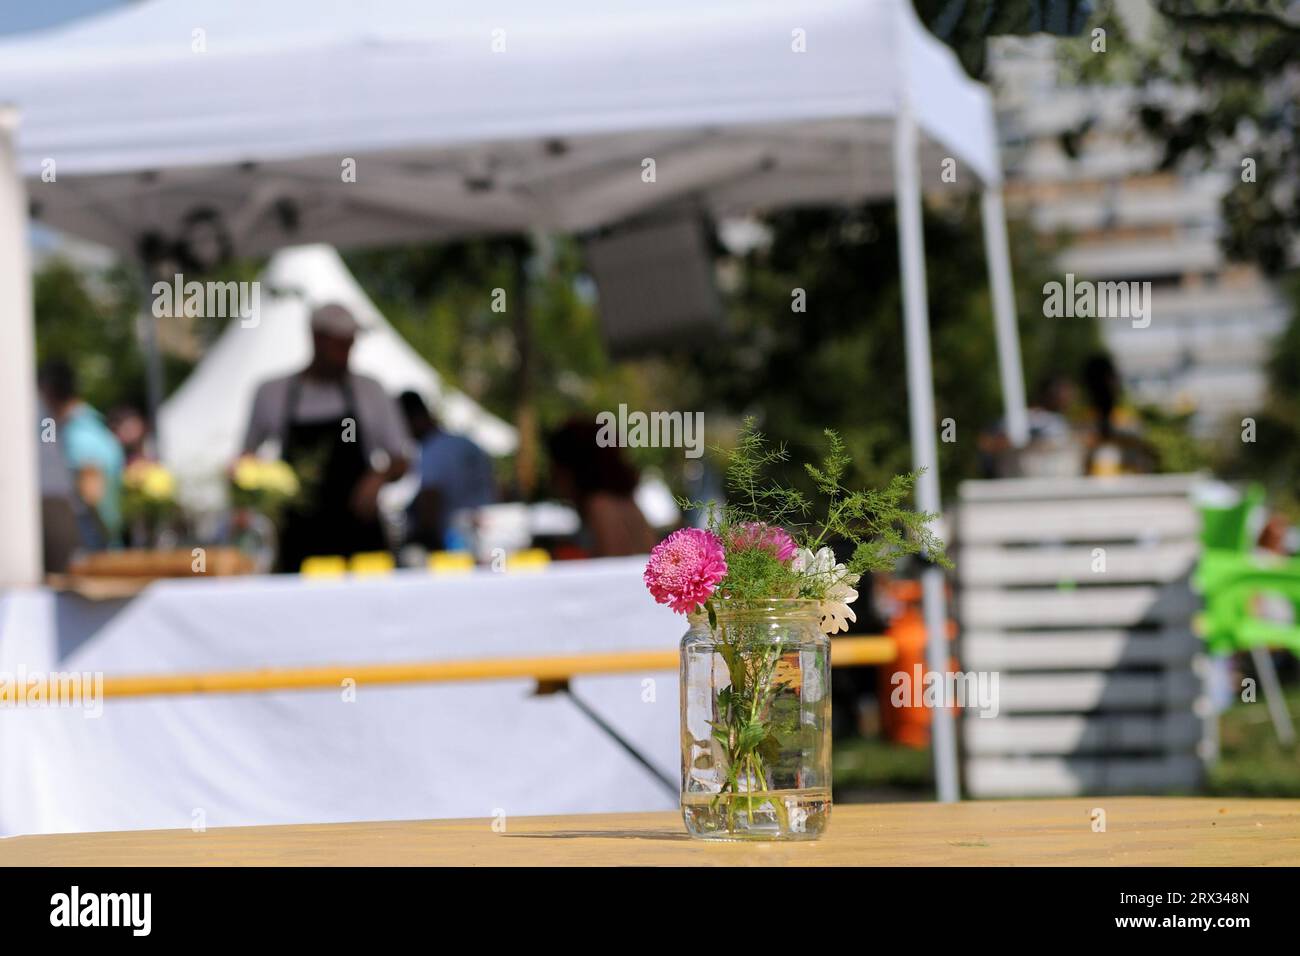 Flower decoration with a blurred vendor tent in the background at a food festival in summer Stock Photo